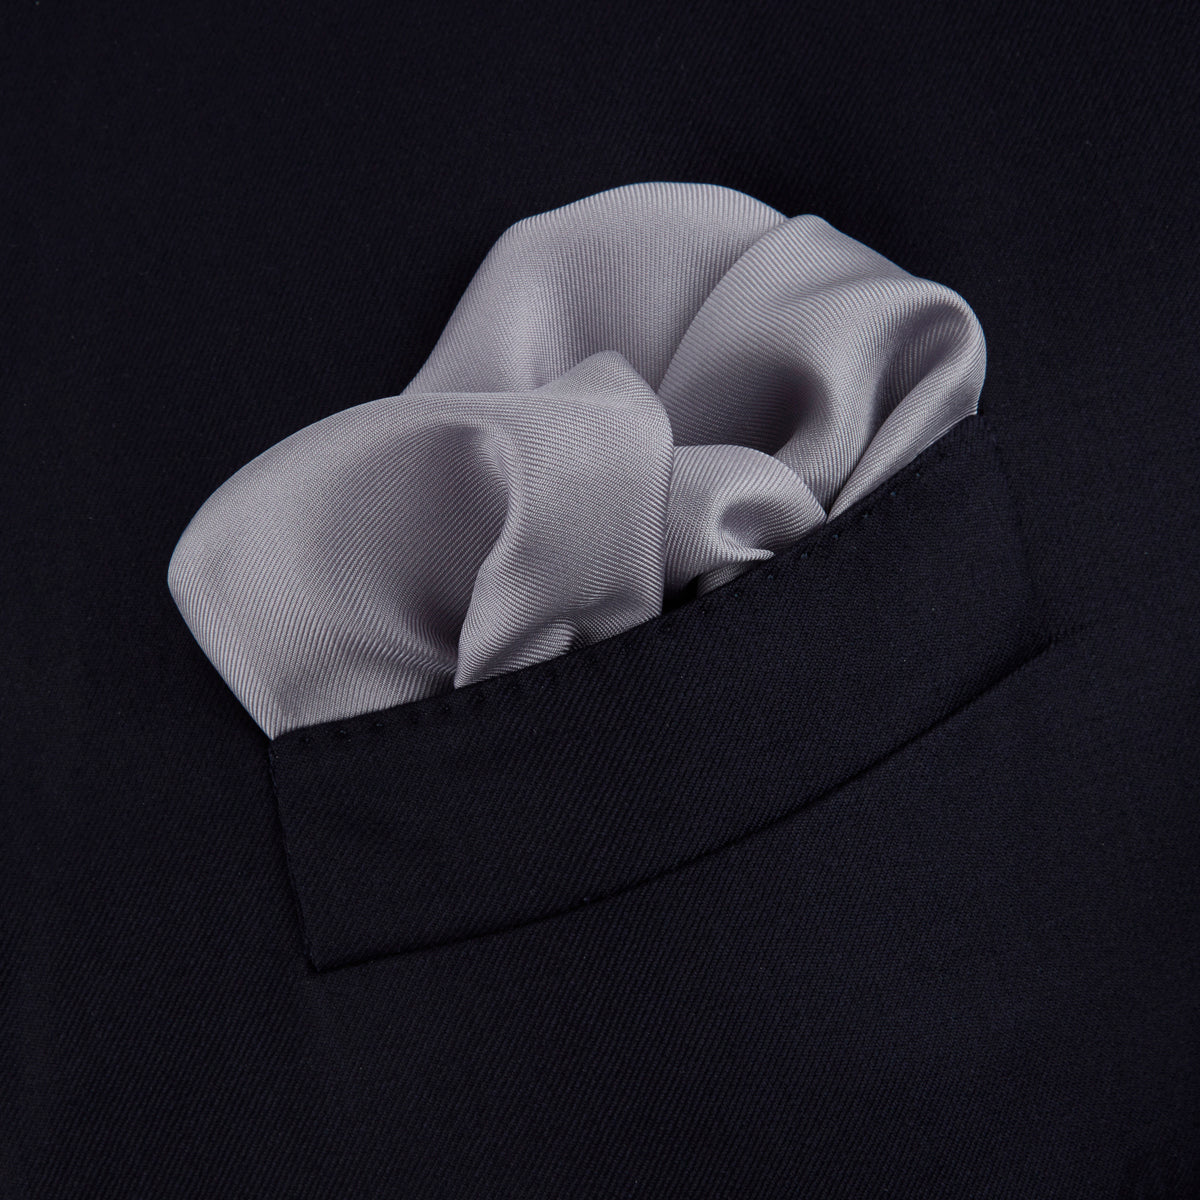 Grey and White Piped Silk Pocket Square